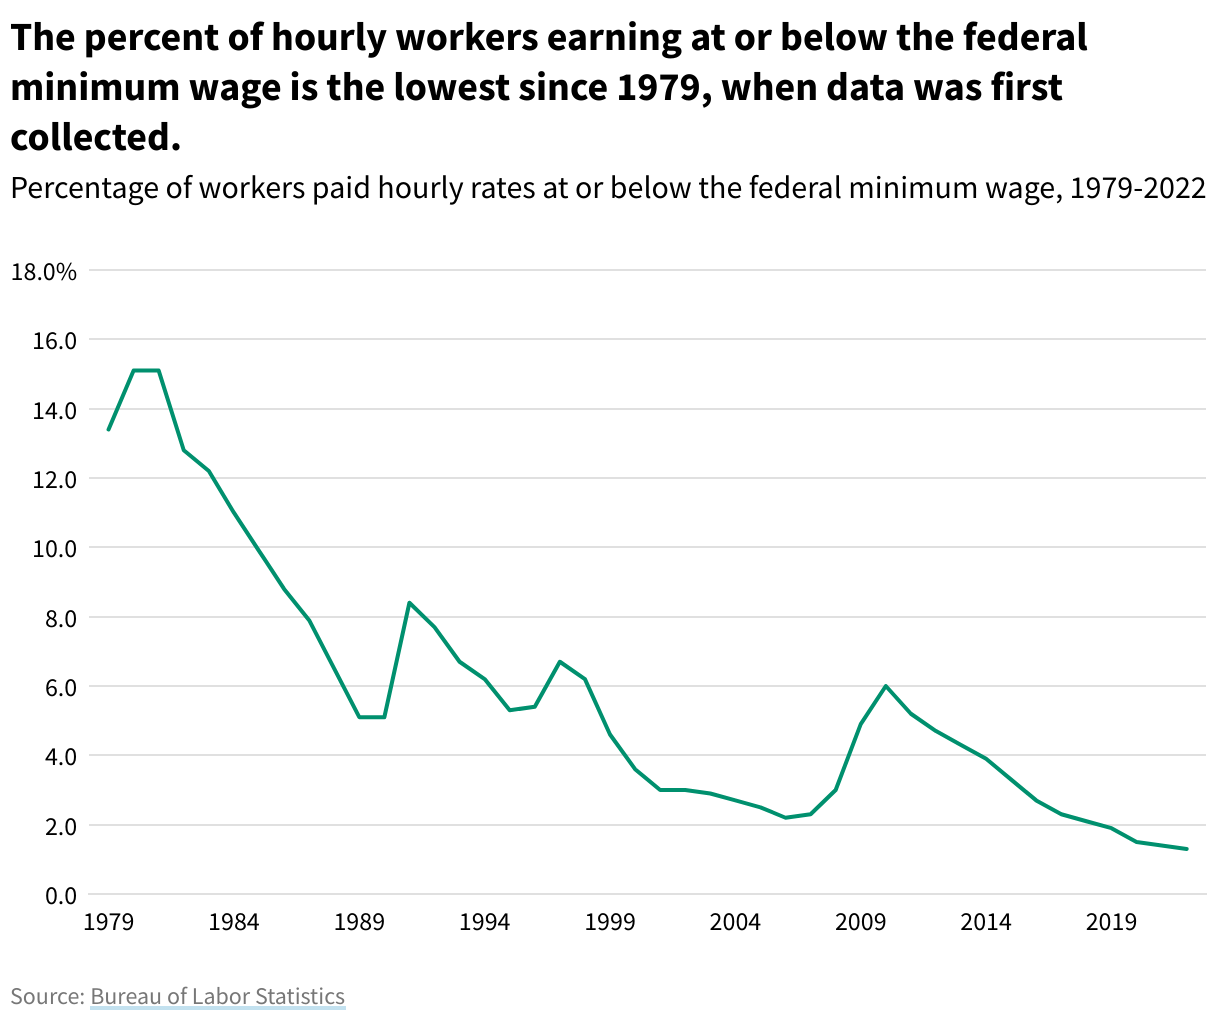 A line chart showing the percentage of hourly workers who earn at or below the federal minimum wage